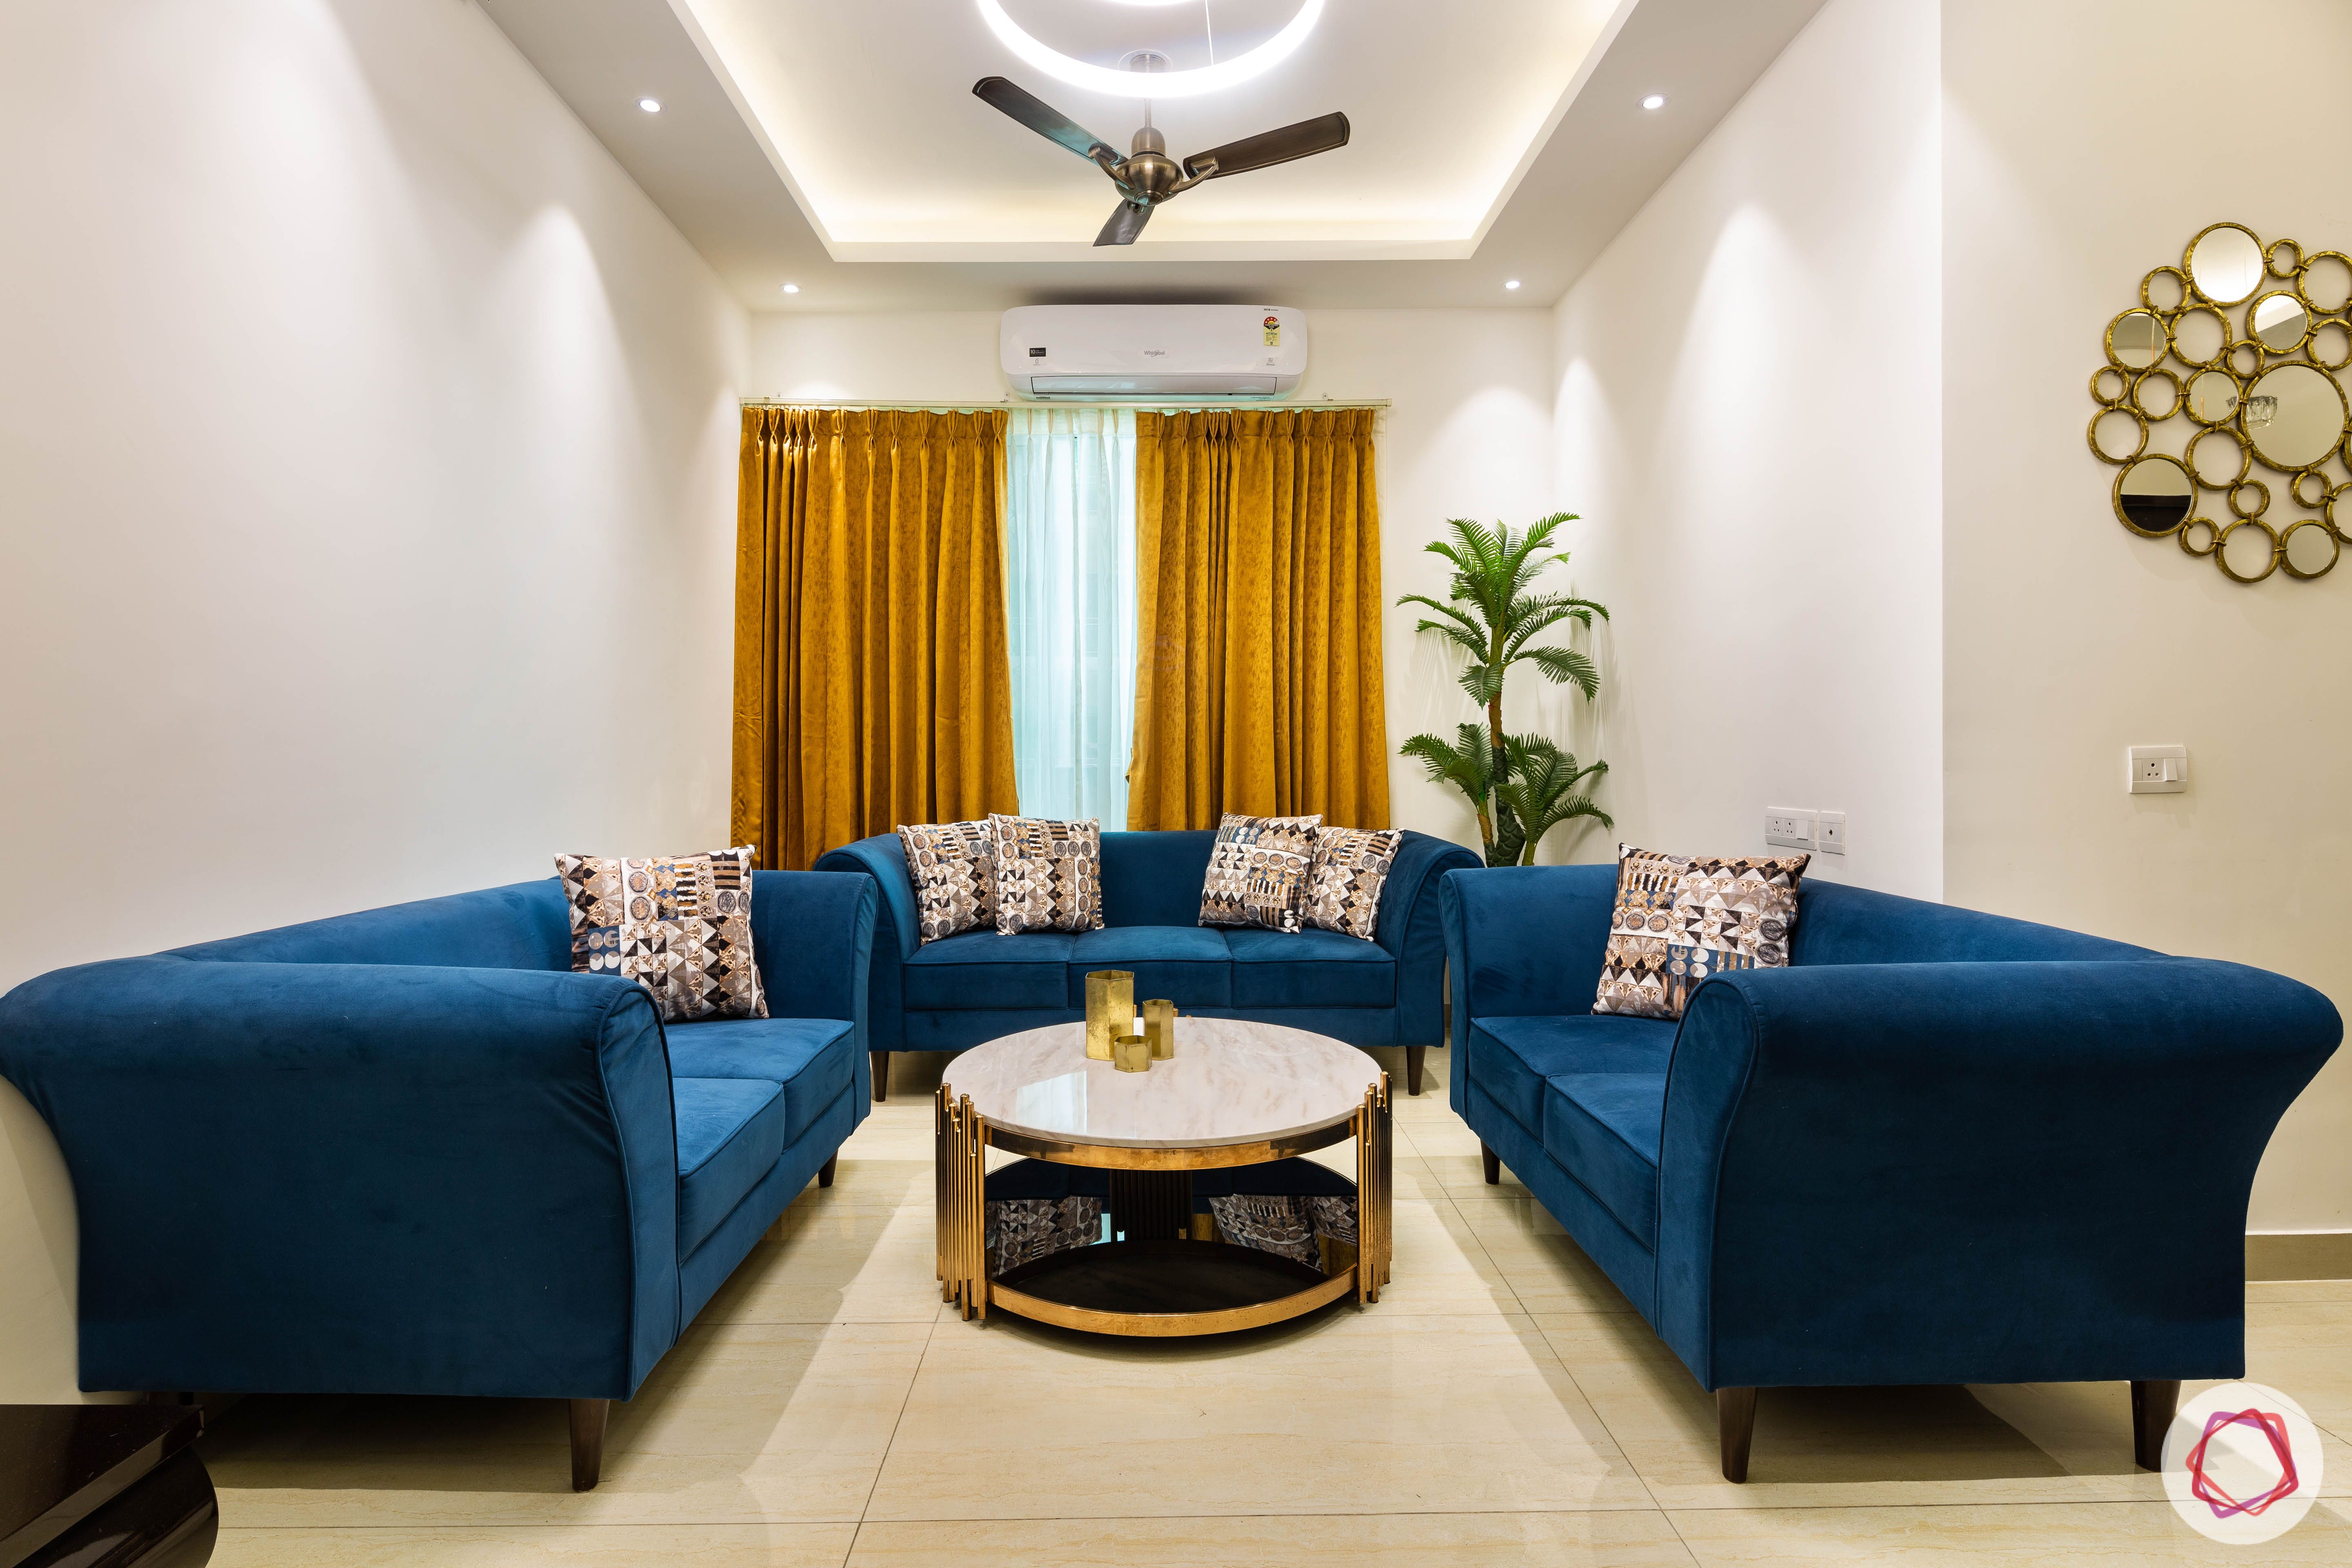 3 bhk flat-living room-entrance-blue sofas-yellow curtains